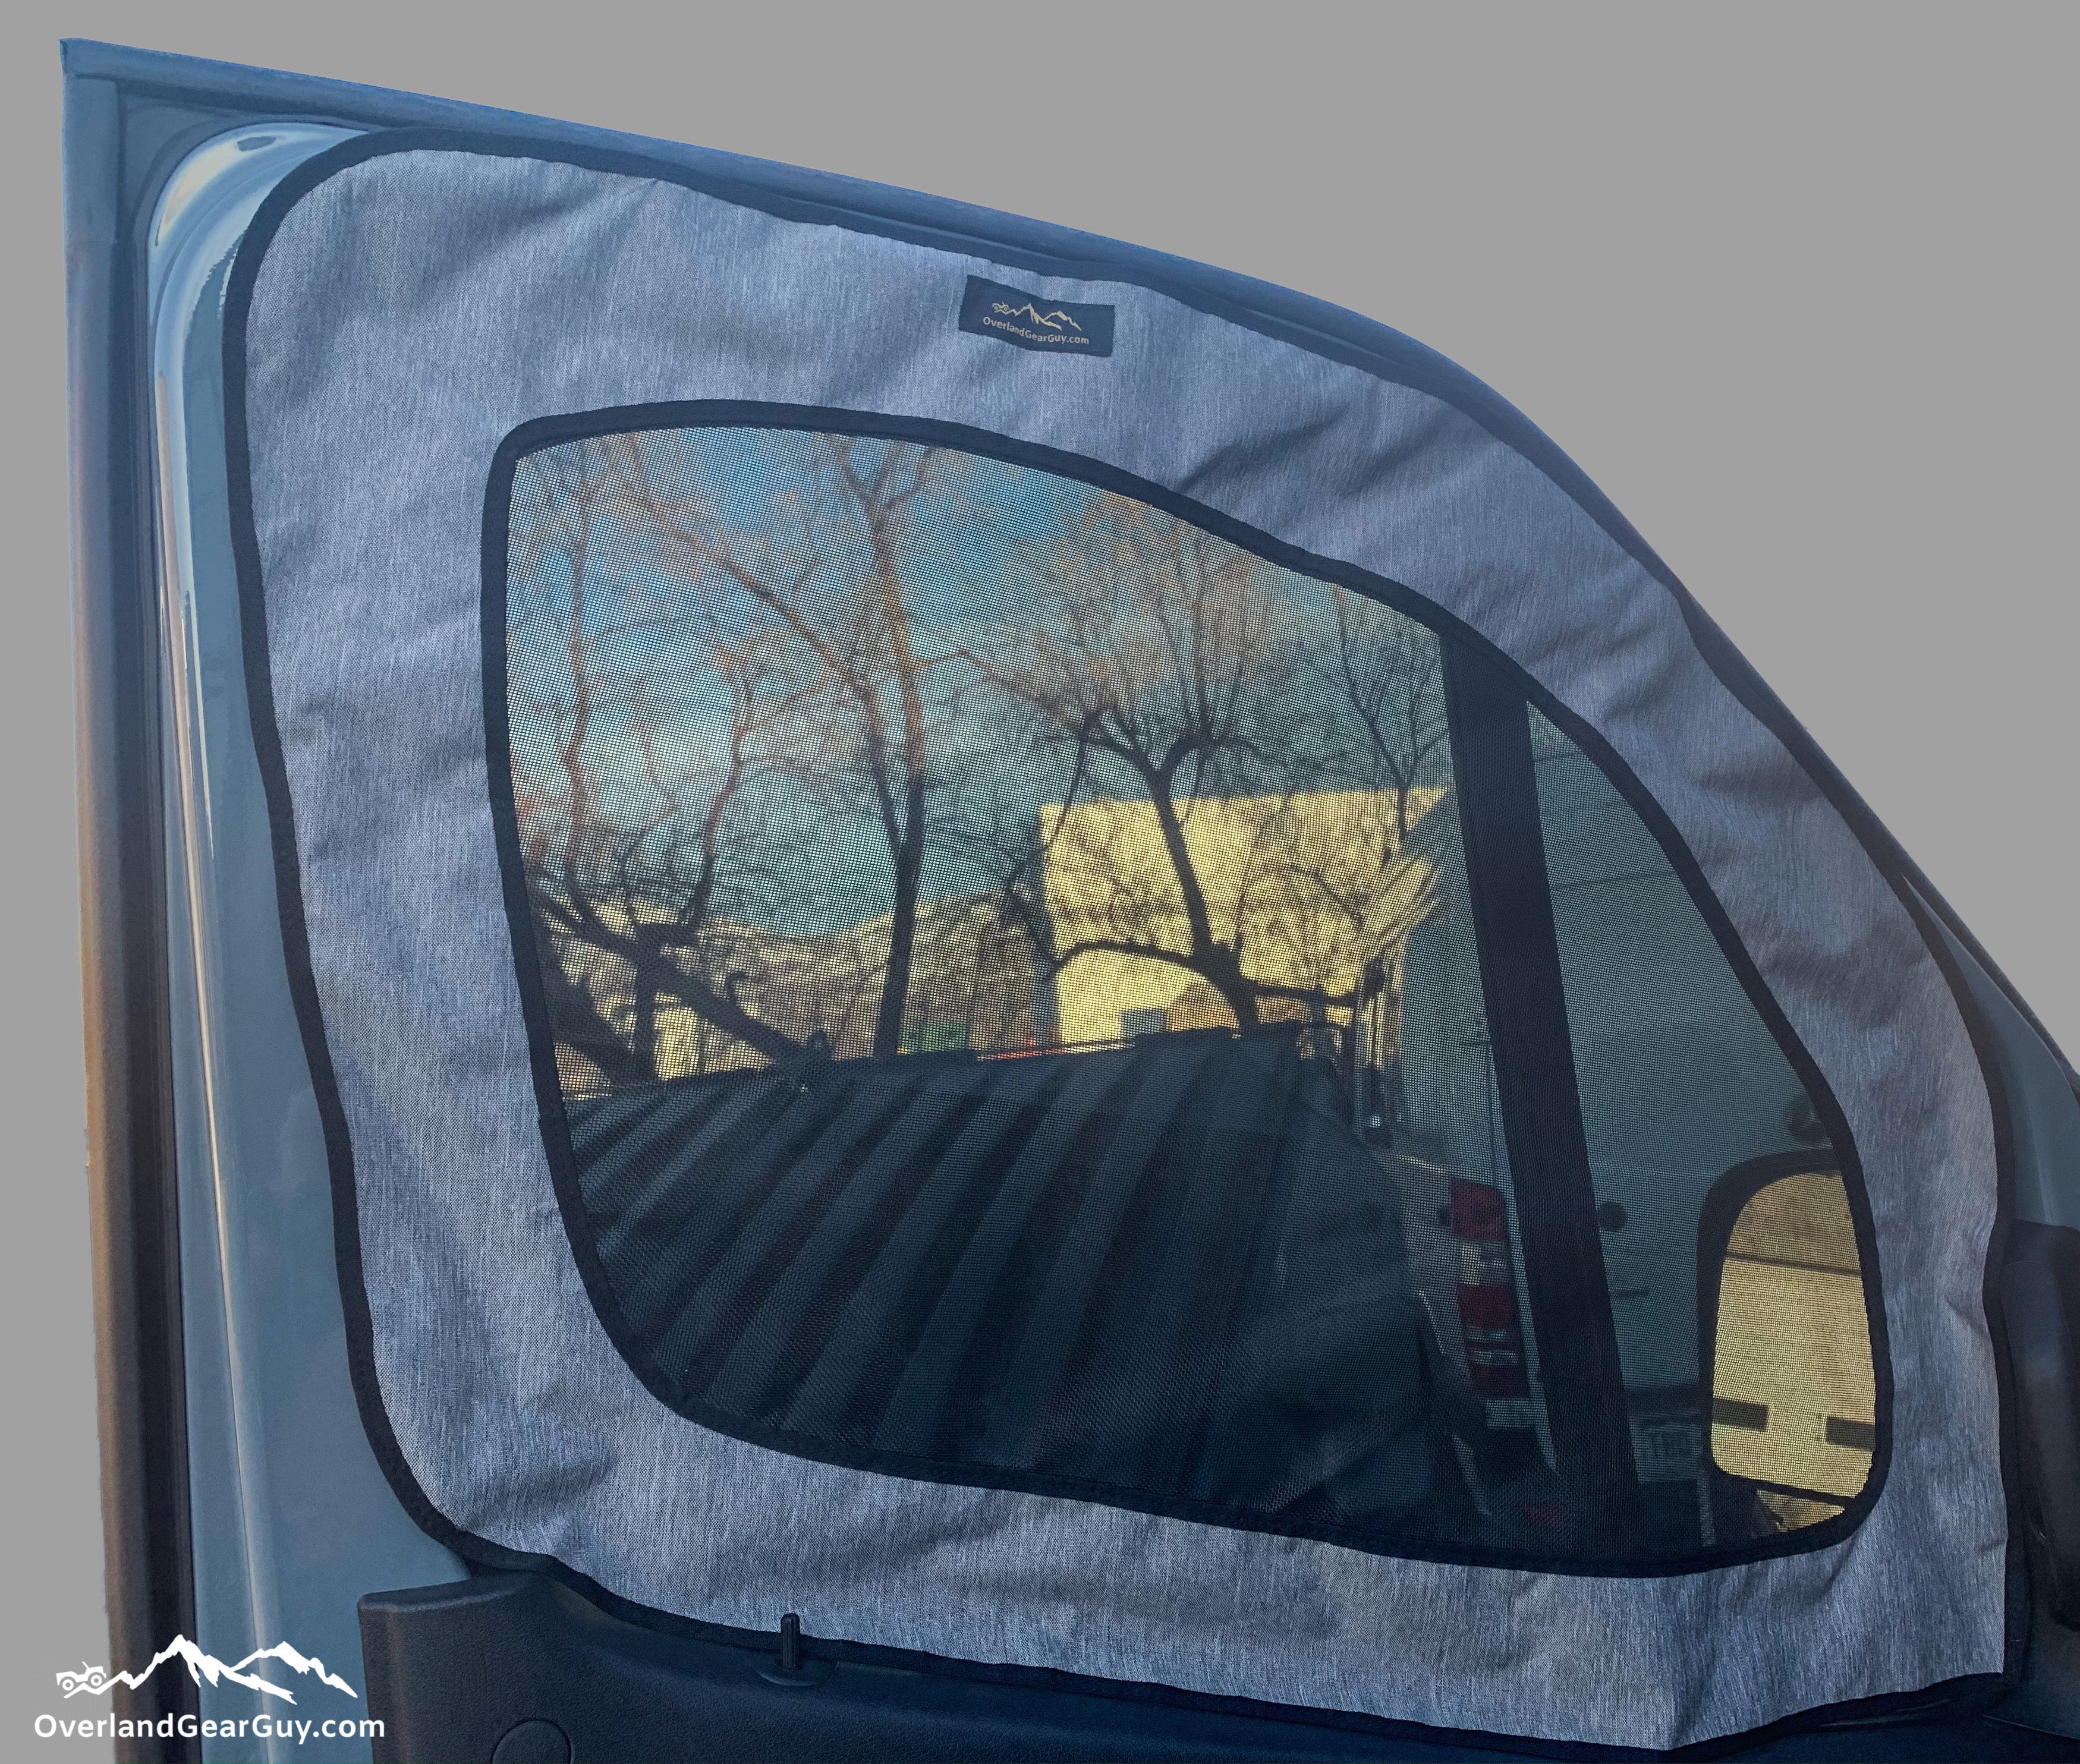 Insect Net Mosquito Nets for Mercedes Sprinter Compatible with Vans and RV ( Tailgate) : : Automotive